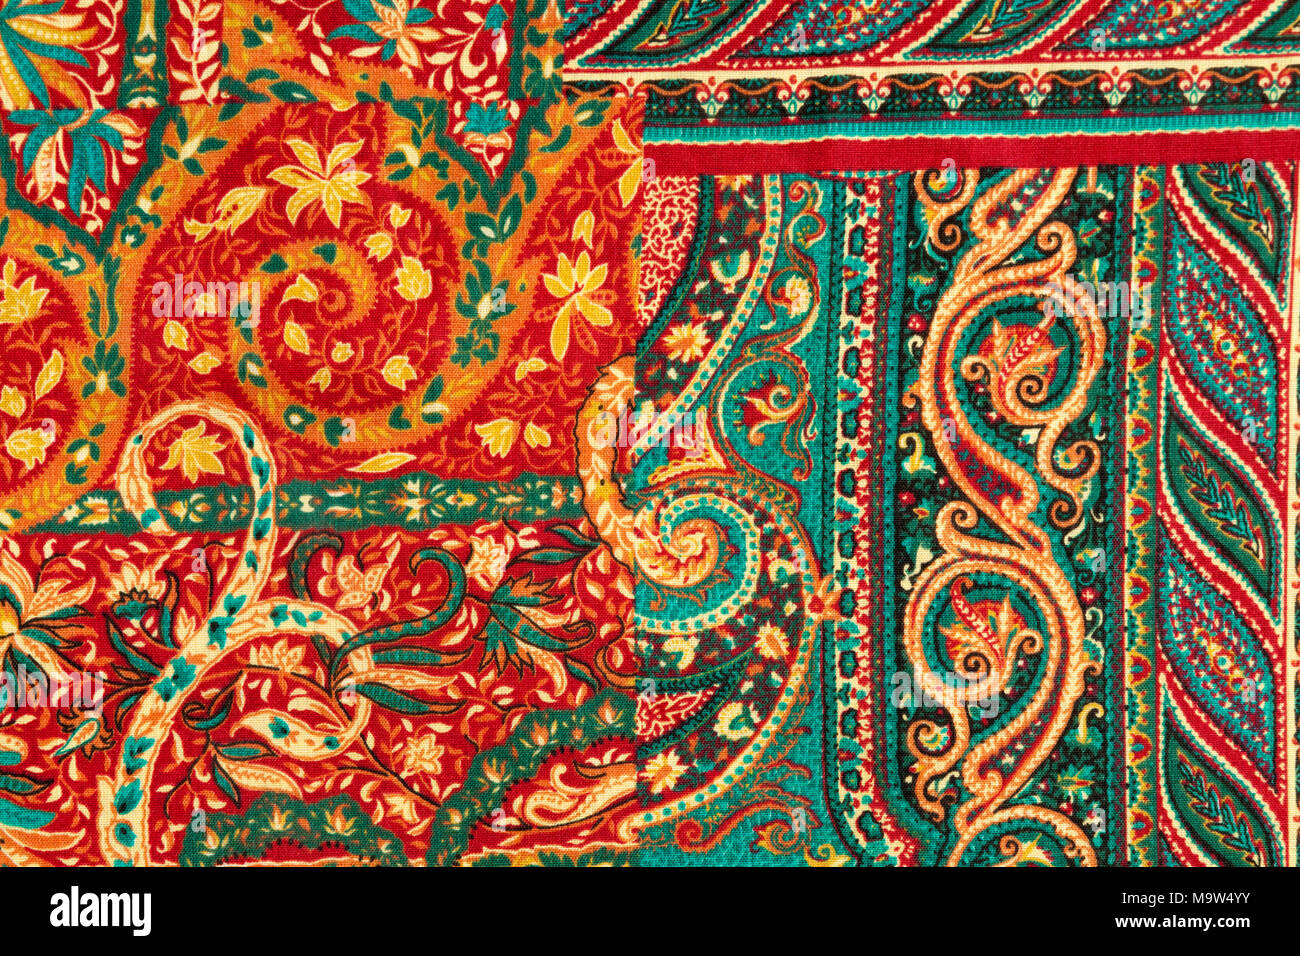 Detail shot of a piece of fabric with a vibrant abstract Paisley pattern - a floral design with scrolls Stock Photo